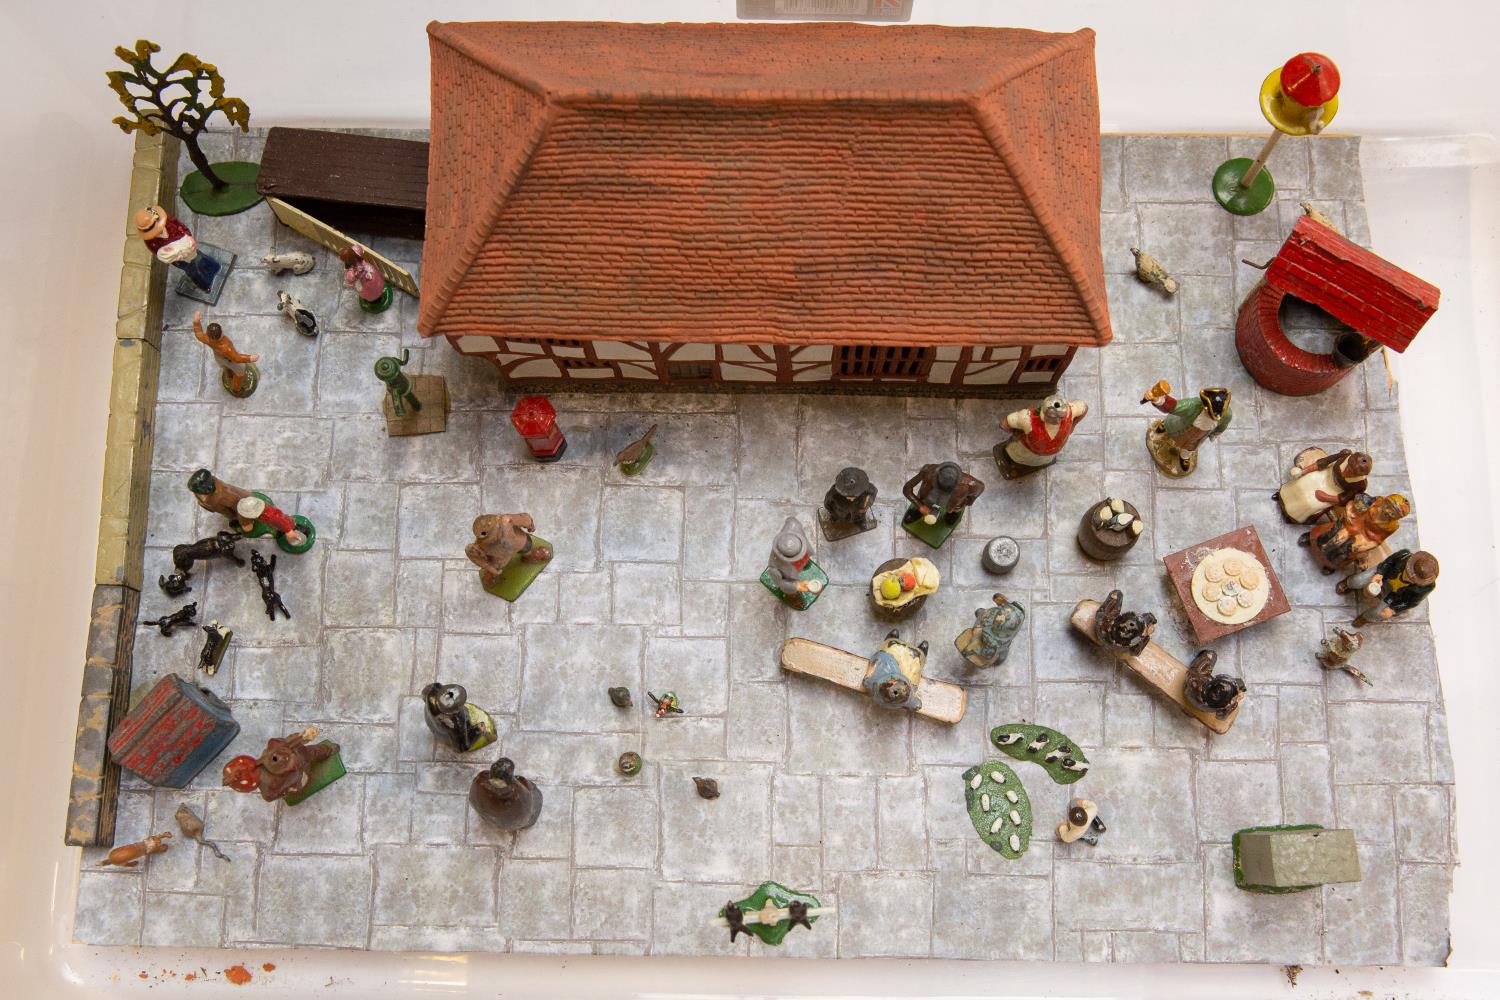 A well made Diorama 'Market Square' using Britains Figures and accessories. Including Village Idiot,